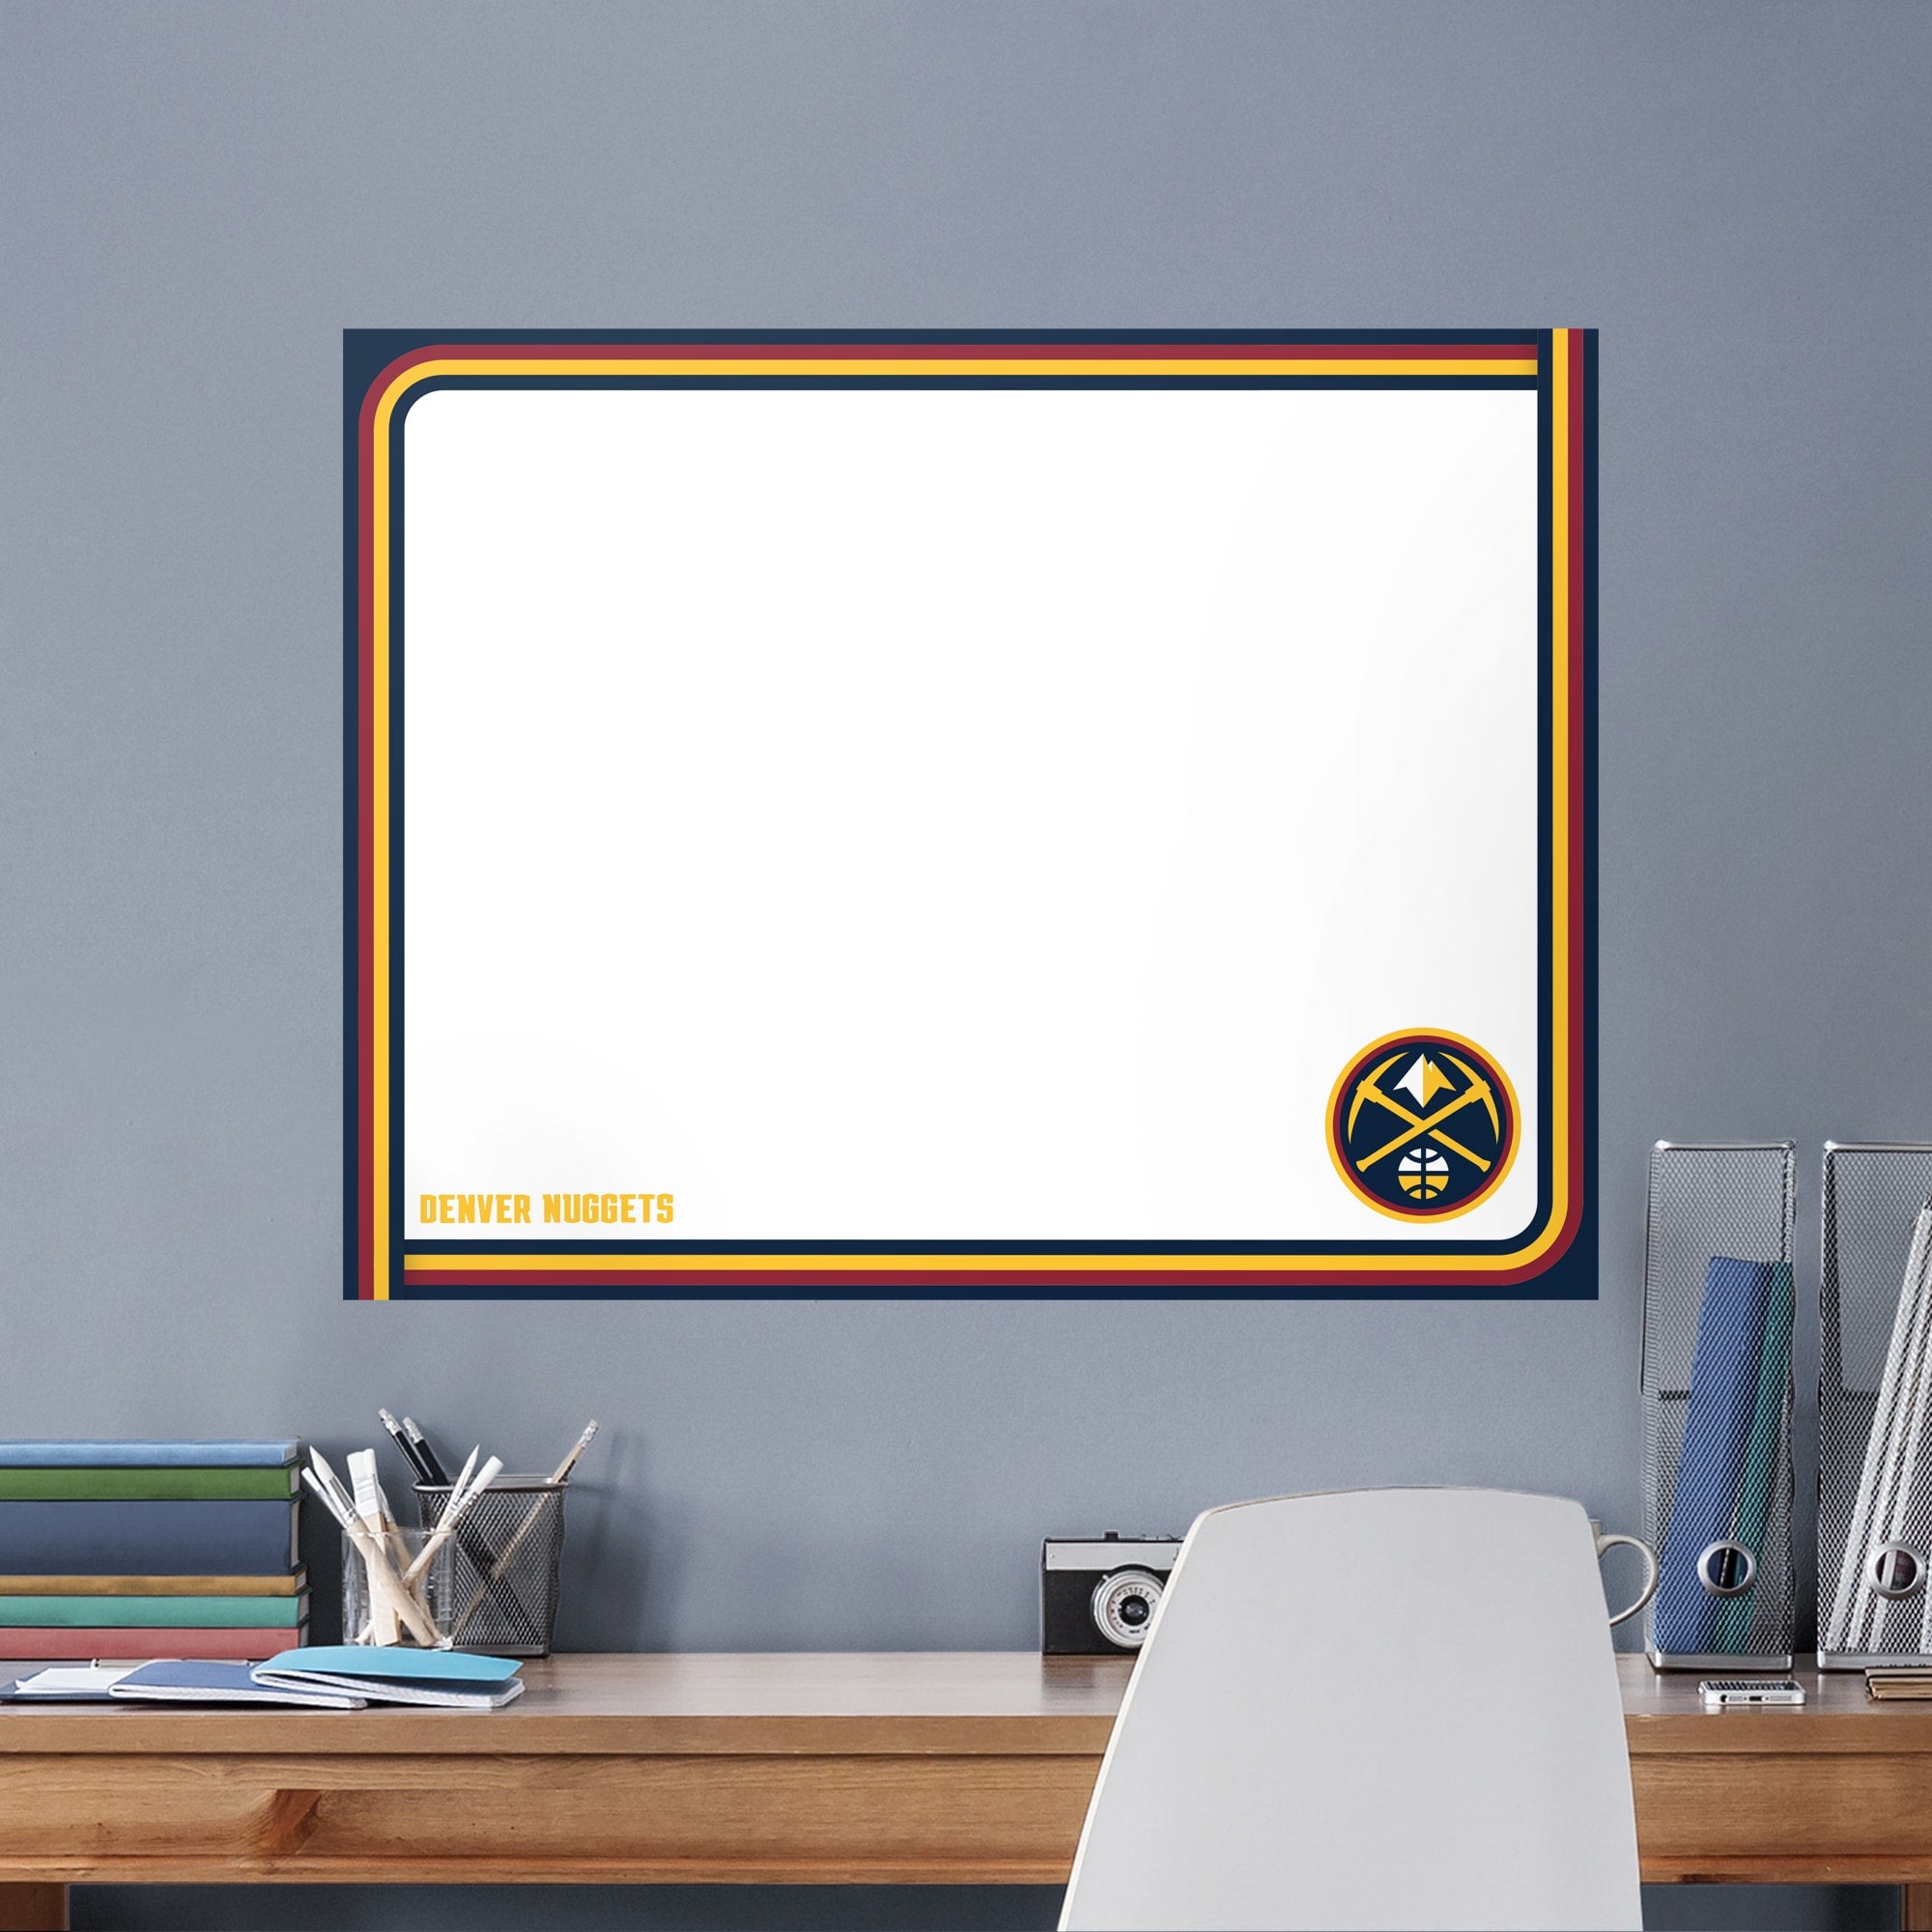 Denver Nuggets for Denver Nuggets: Dry Erase Whiteboard - Officially Licensed NBA Removable Wall Decal XL by Fathead | Vinyl